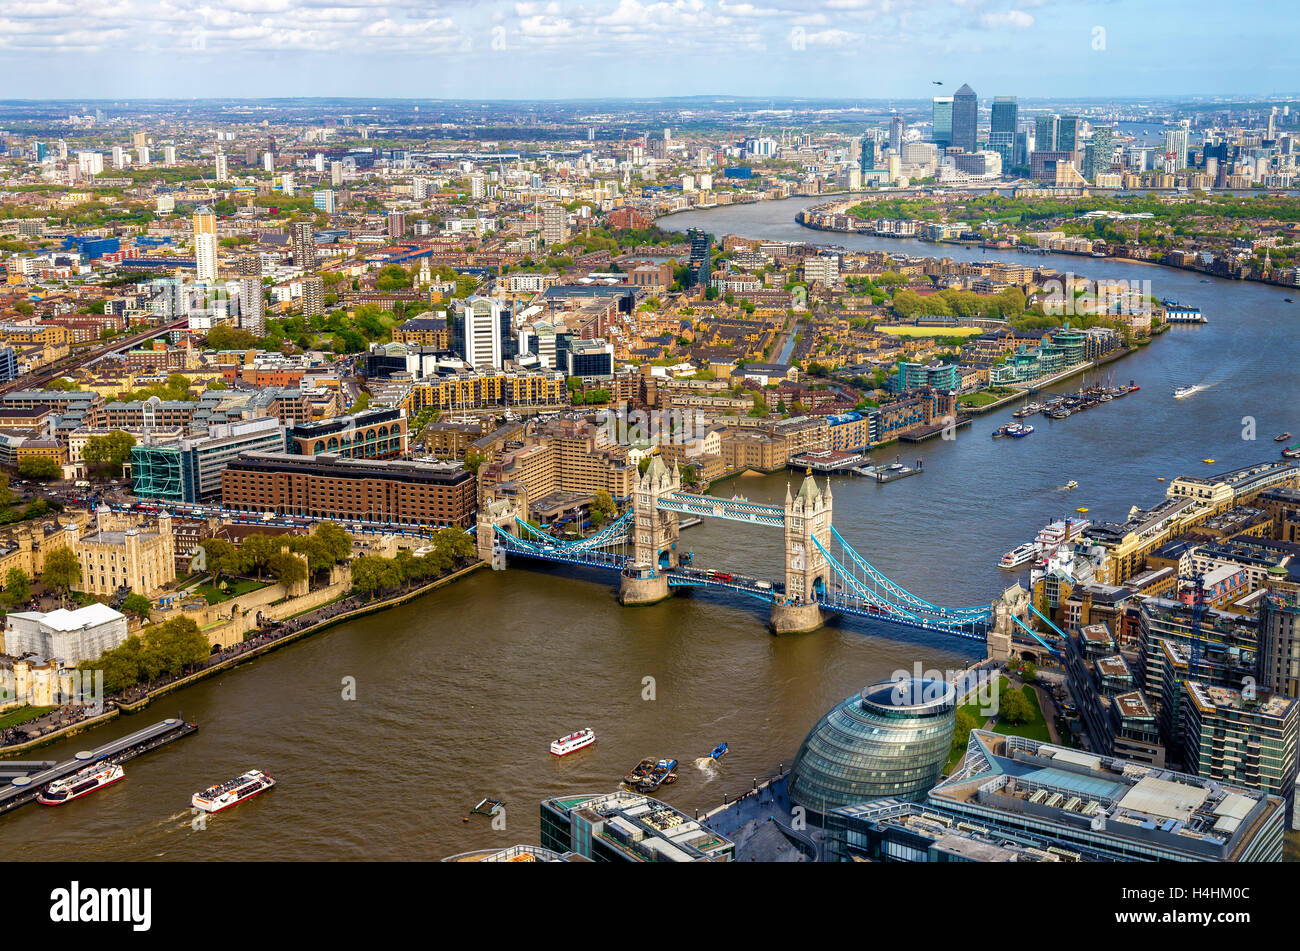 View of Tower Bridge from the Shard - London, England Stock Photo